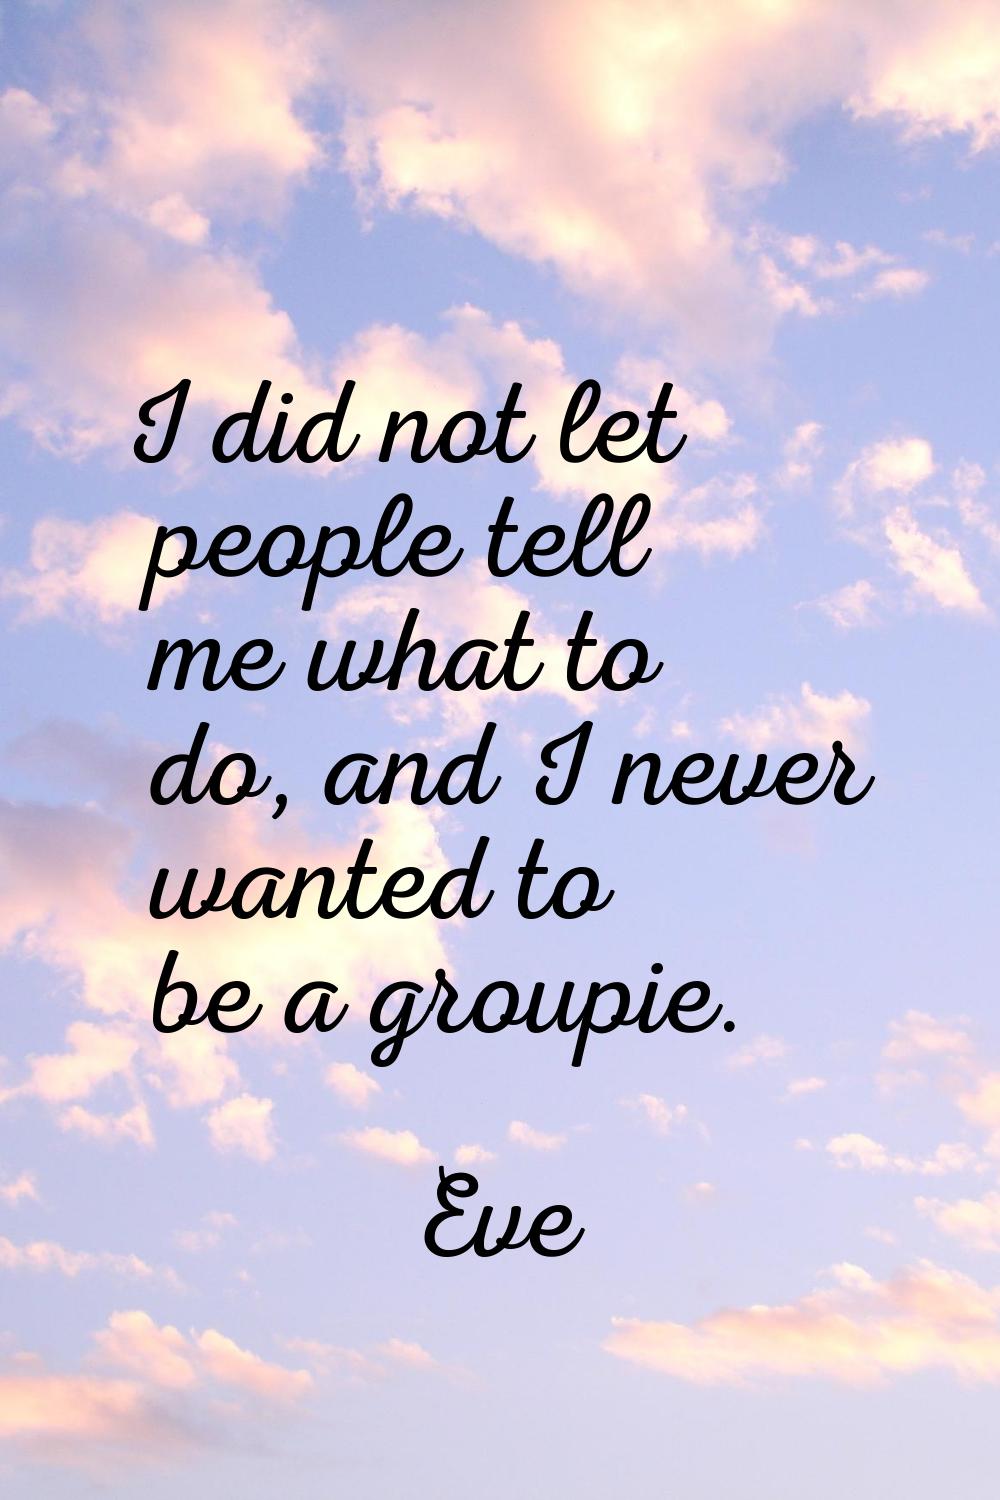 I did not let people tell me what to do, and I never wanted to be a groupie.